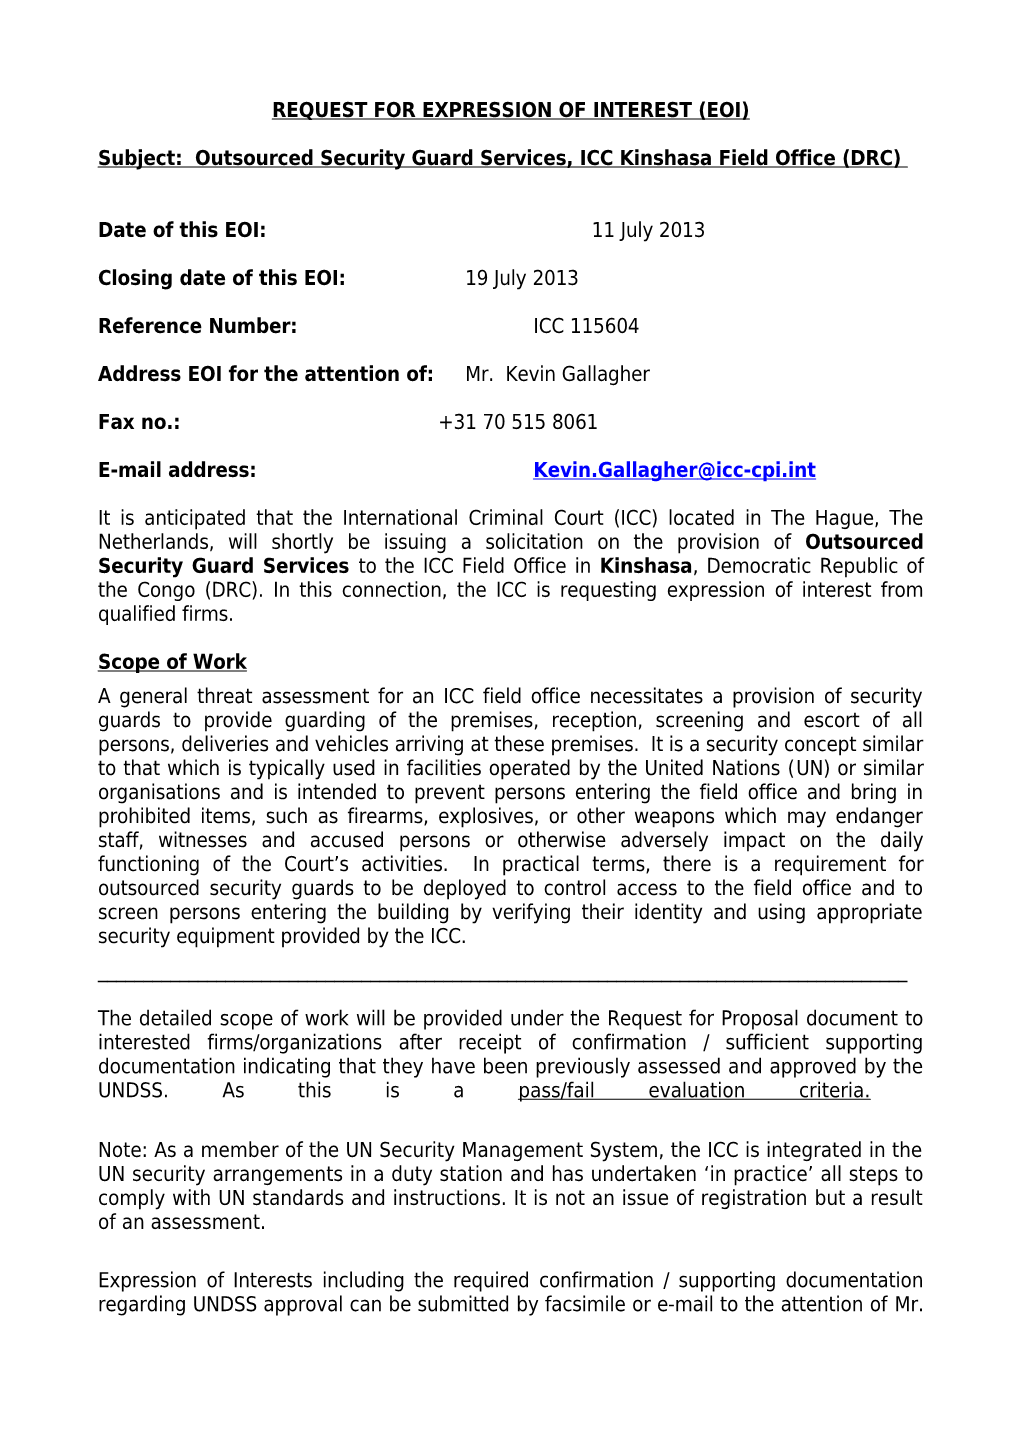 Request for Expression of Interest (Eoi) s4